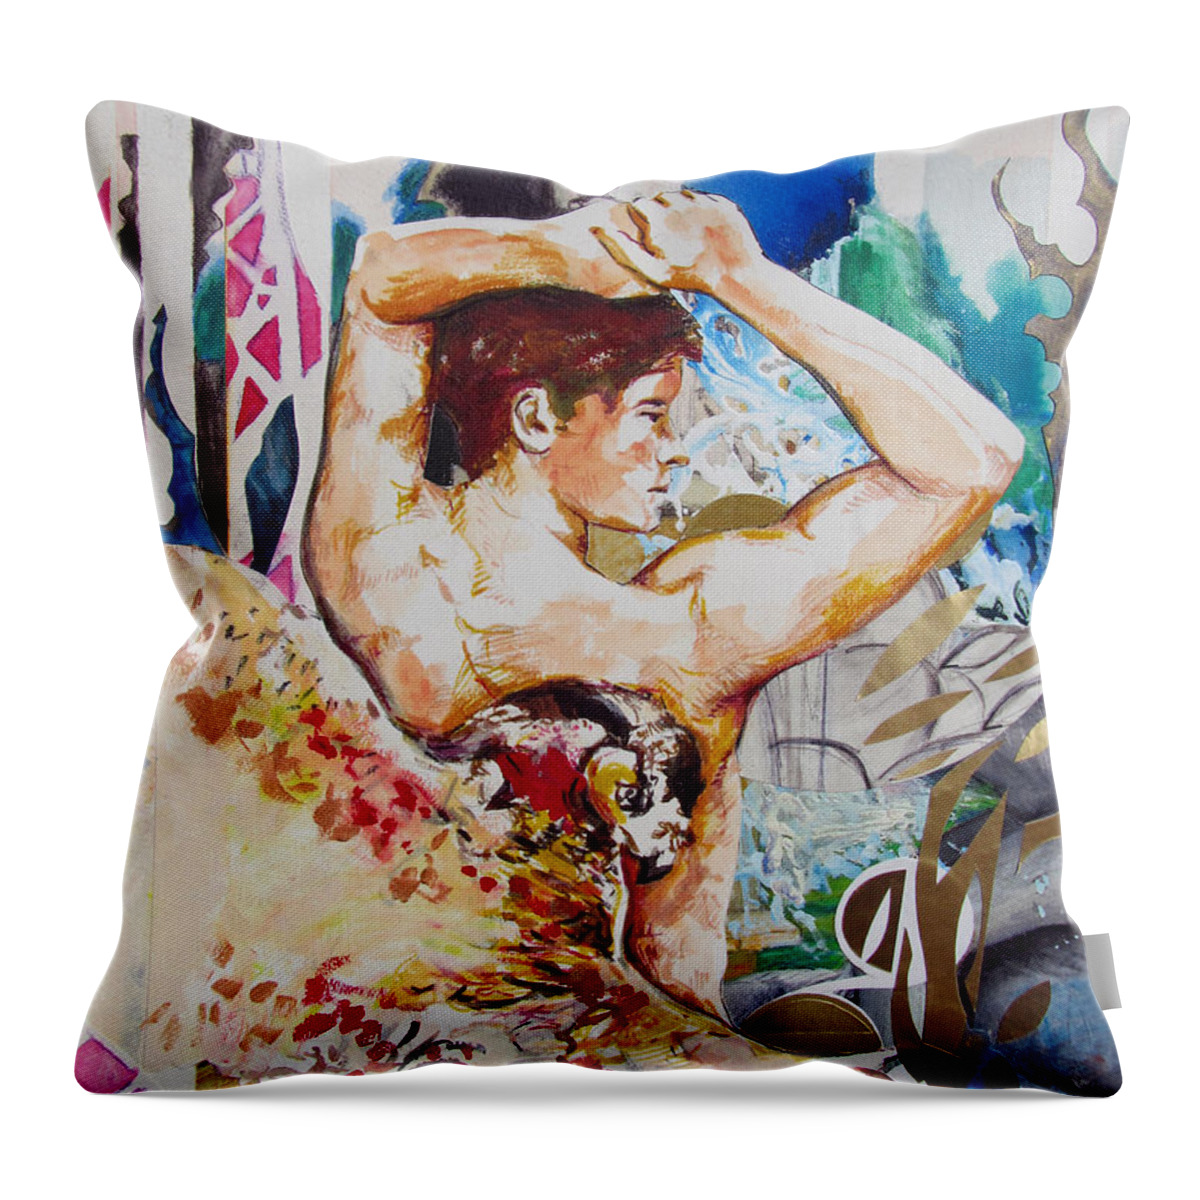 Nude Male Throw Pillow featuring the painting Magic Loves The Hungry by Rene Capone